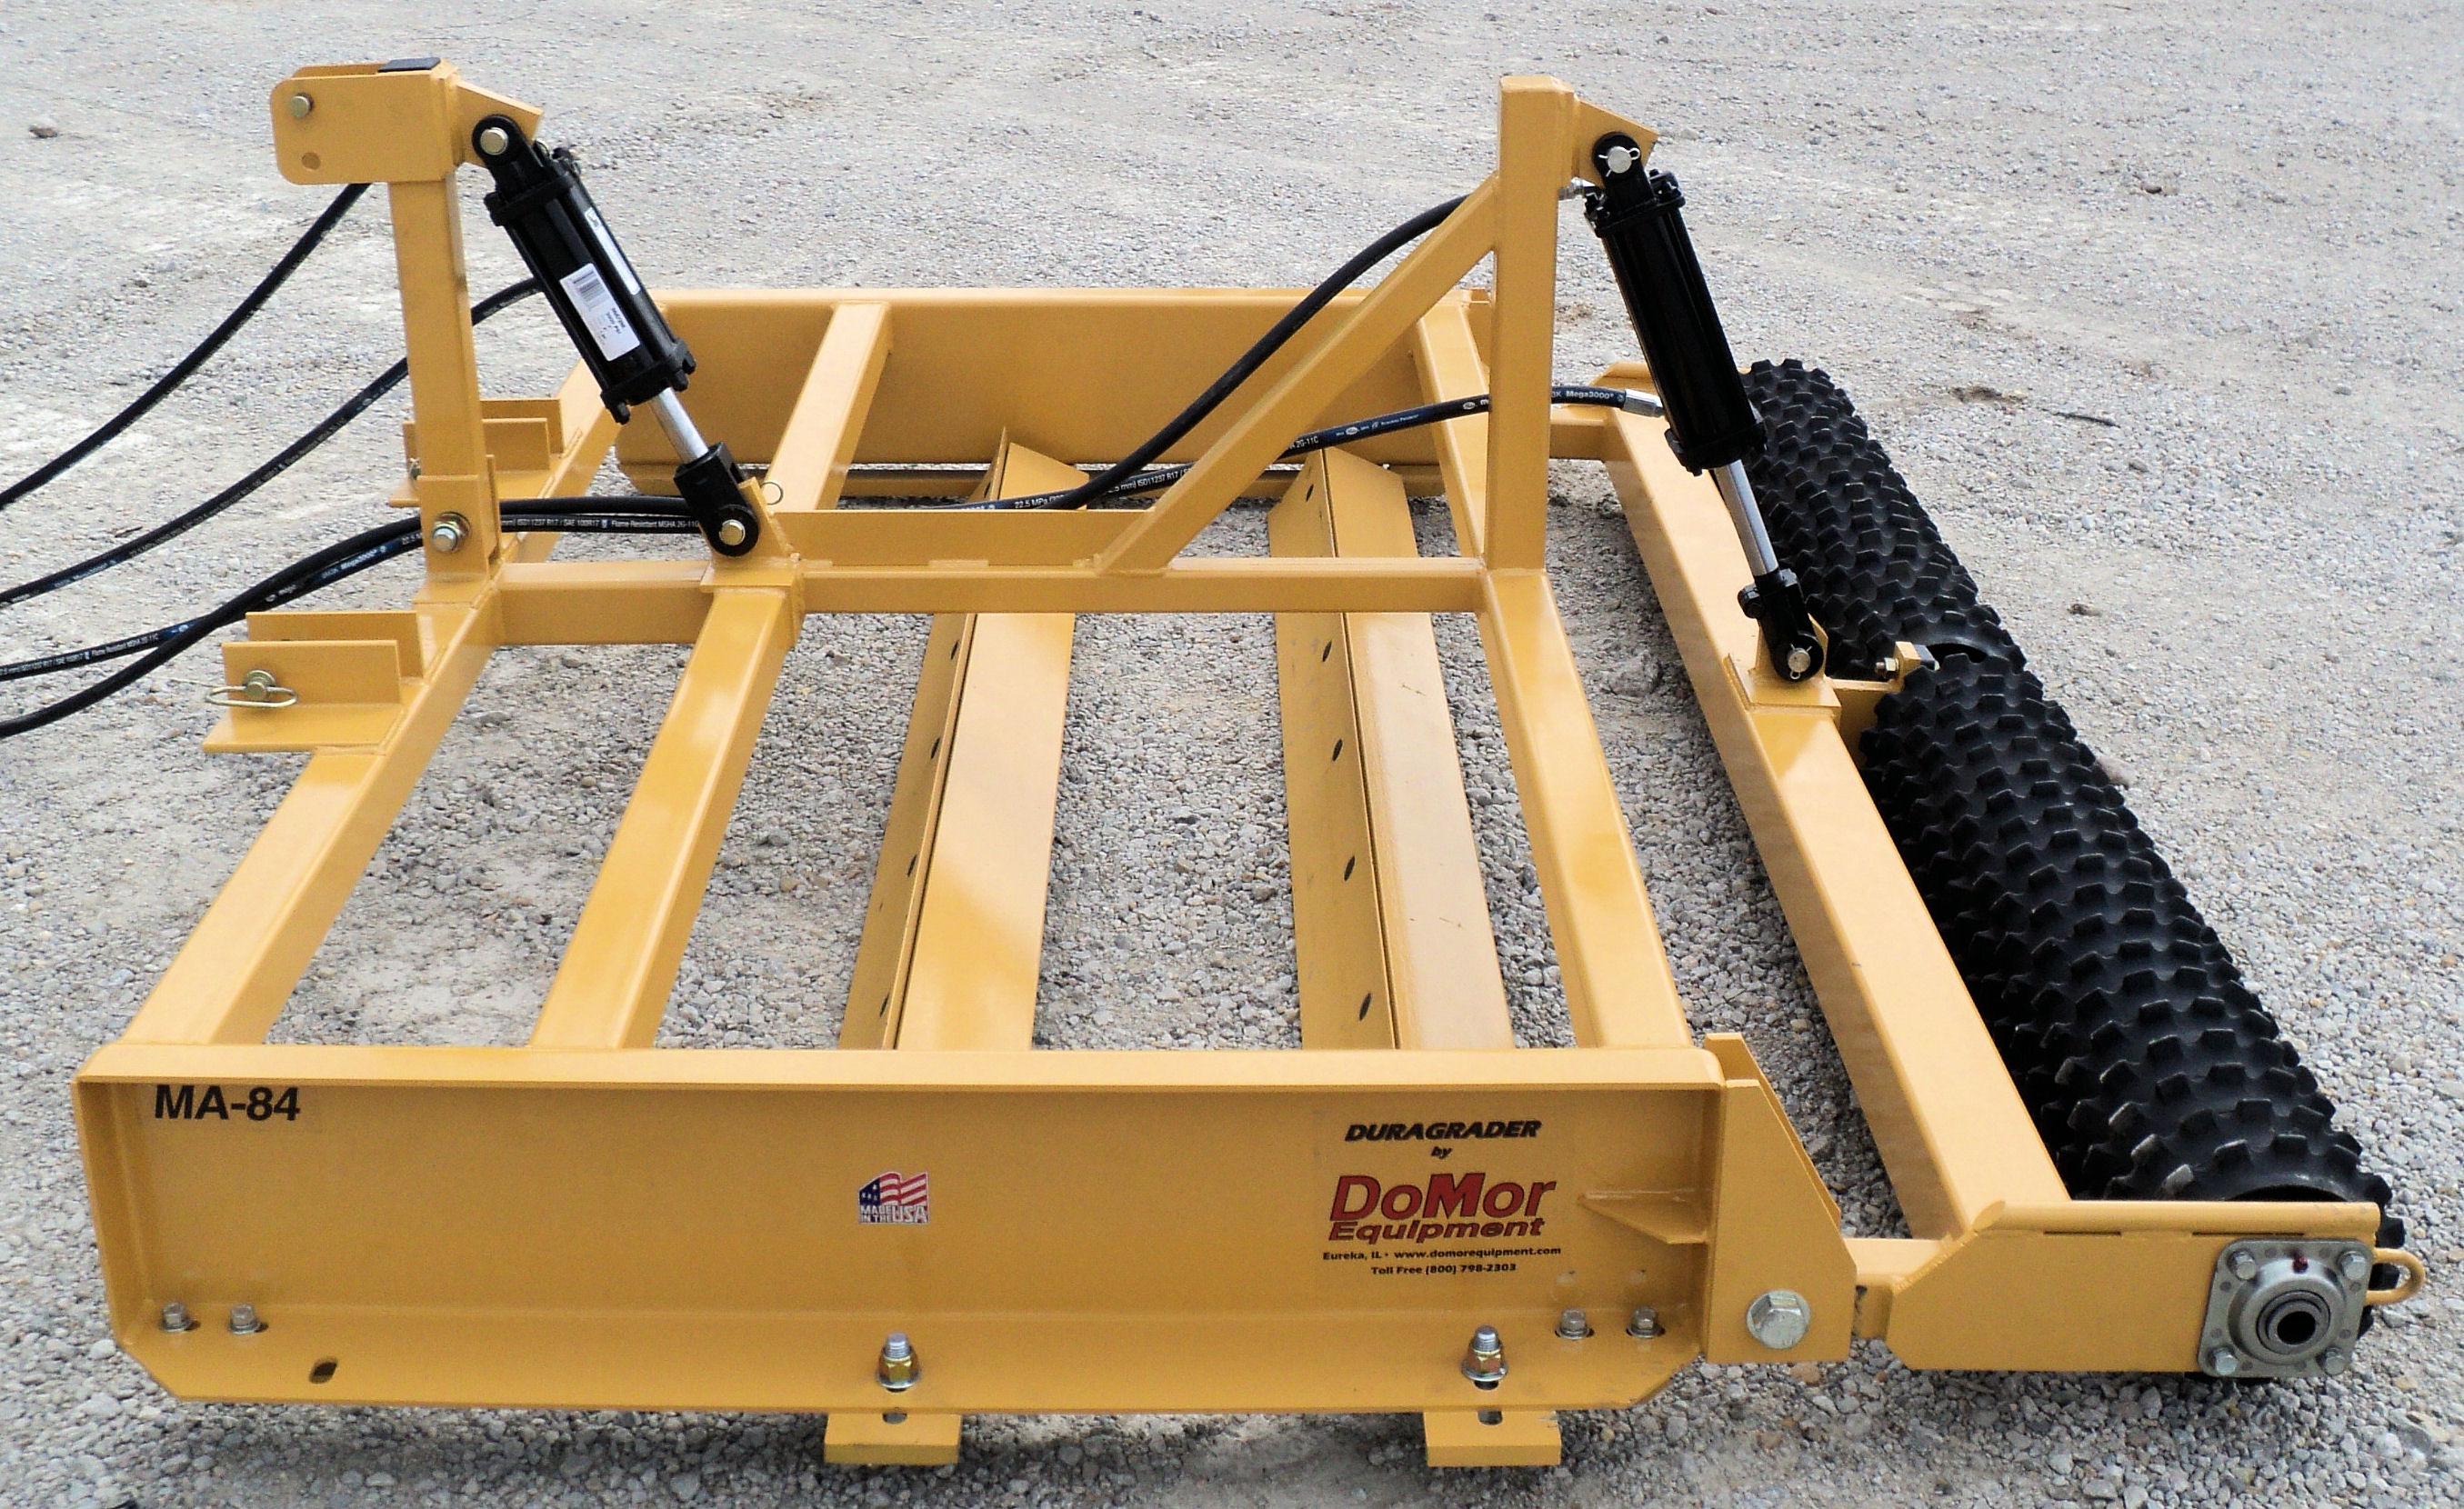 The Culti-Packer Add-On Attachment works great for puverizing and breaking up clumps and clods and also can be used to pack seeds to the proper depth for maximum seed growth.